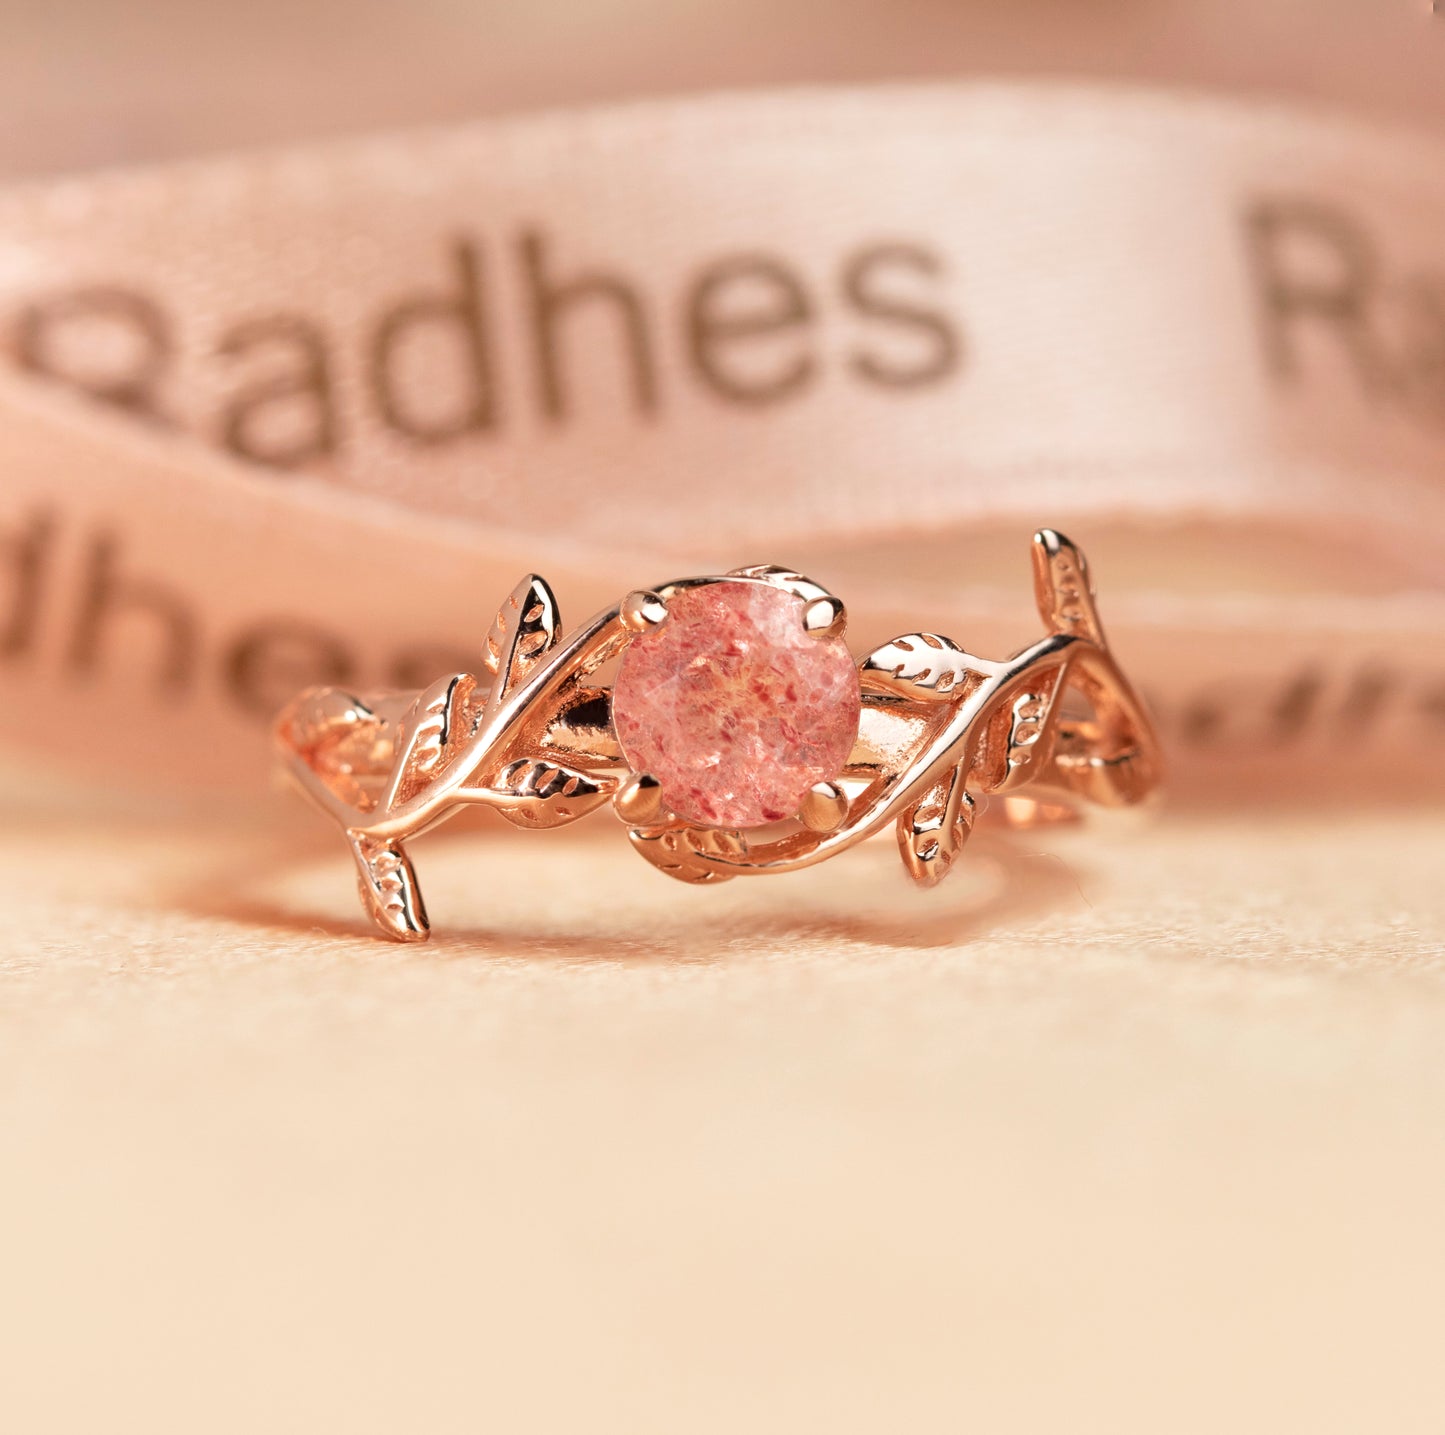 Dainty Vine 1 carat Round Shaped Strawberry Quartz Solitaire Ring in Rose Gold